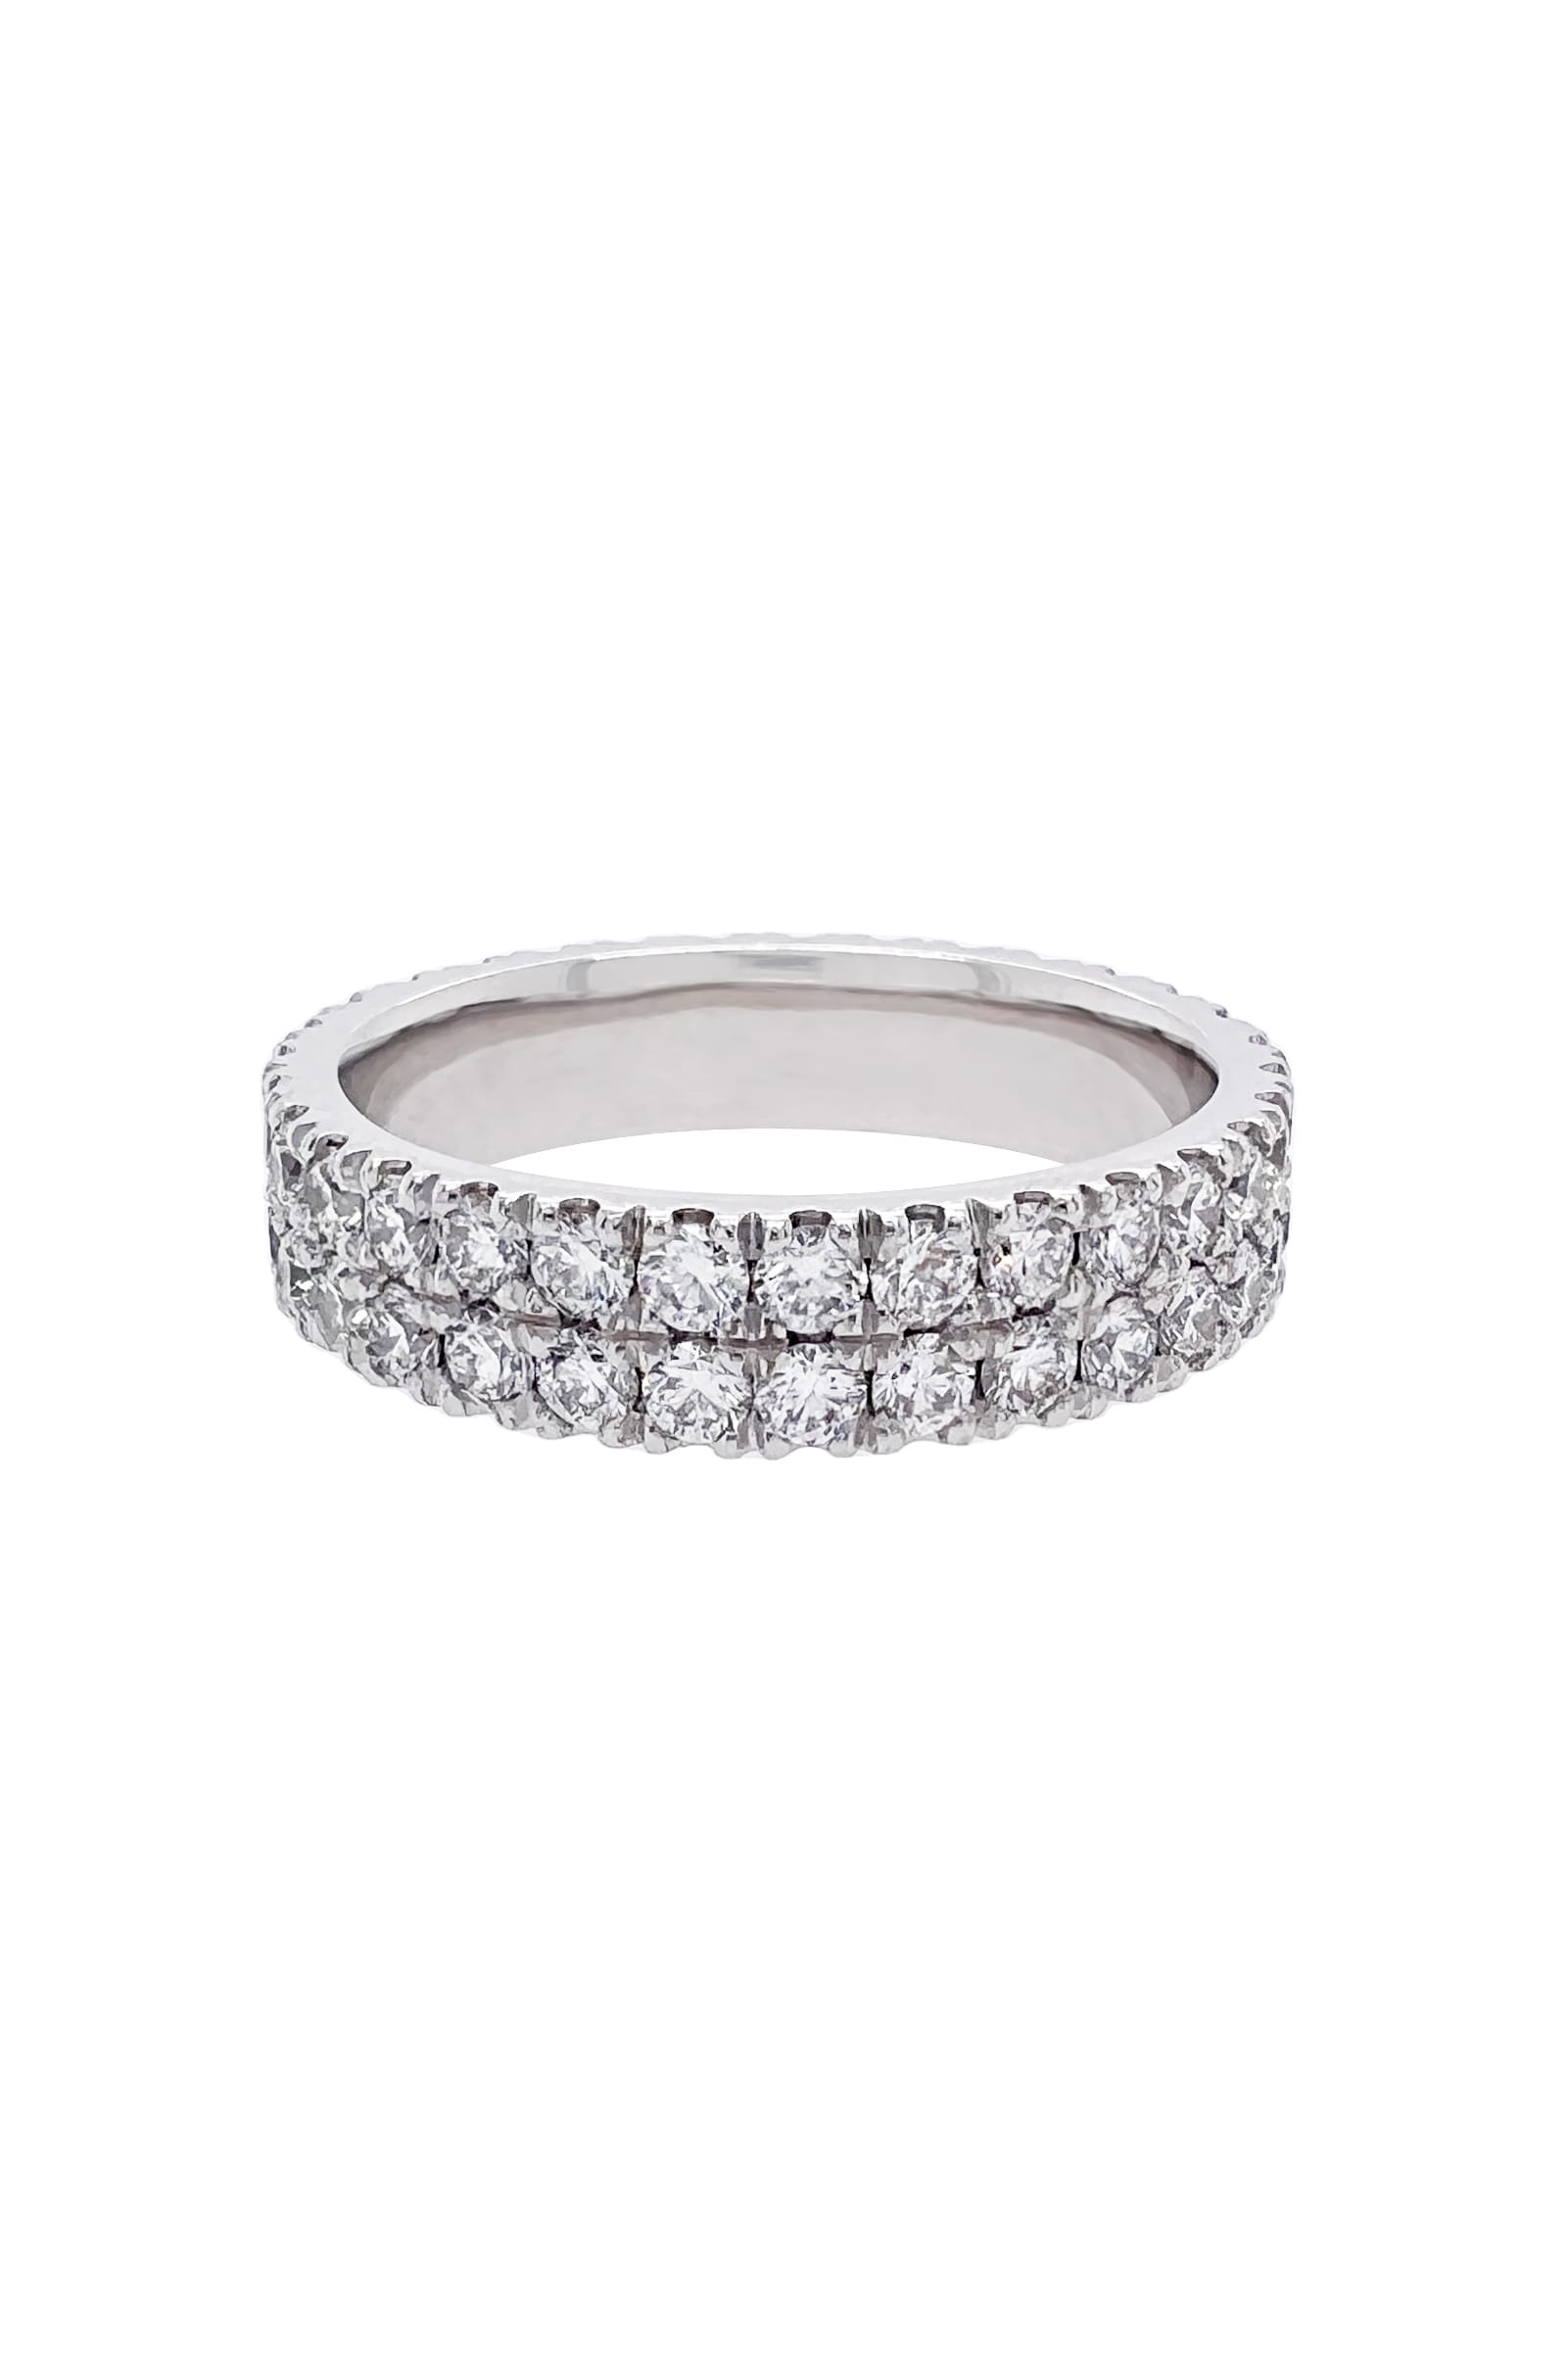 Handcrafted Double Row Full Circle Diamond Ring available at LeGassick Diamonds and Jewellery Gold Coast, Australia.